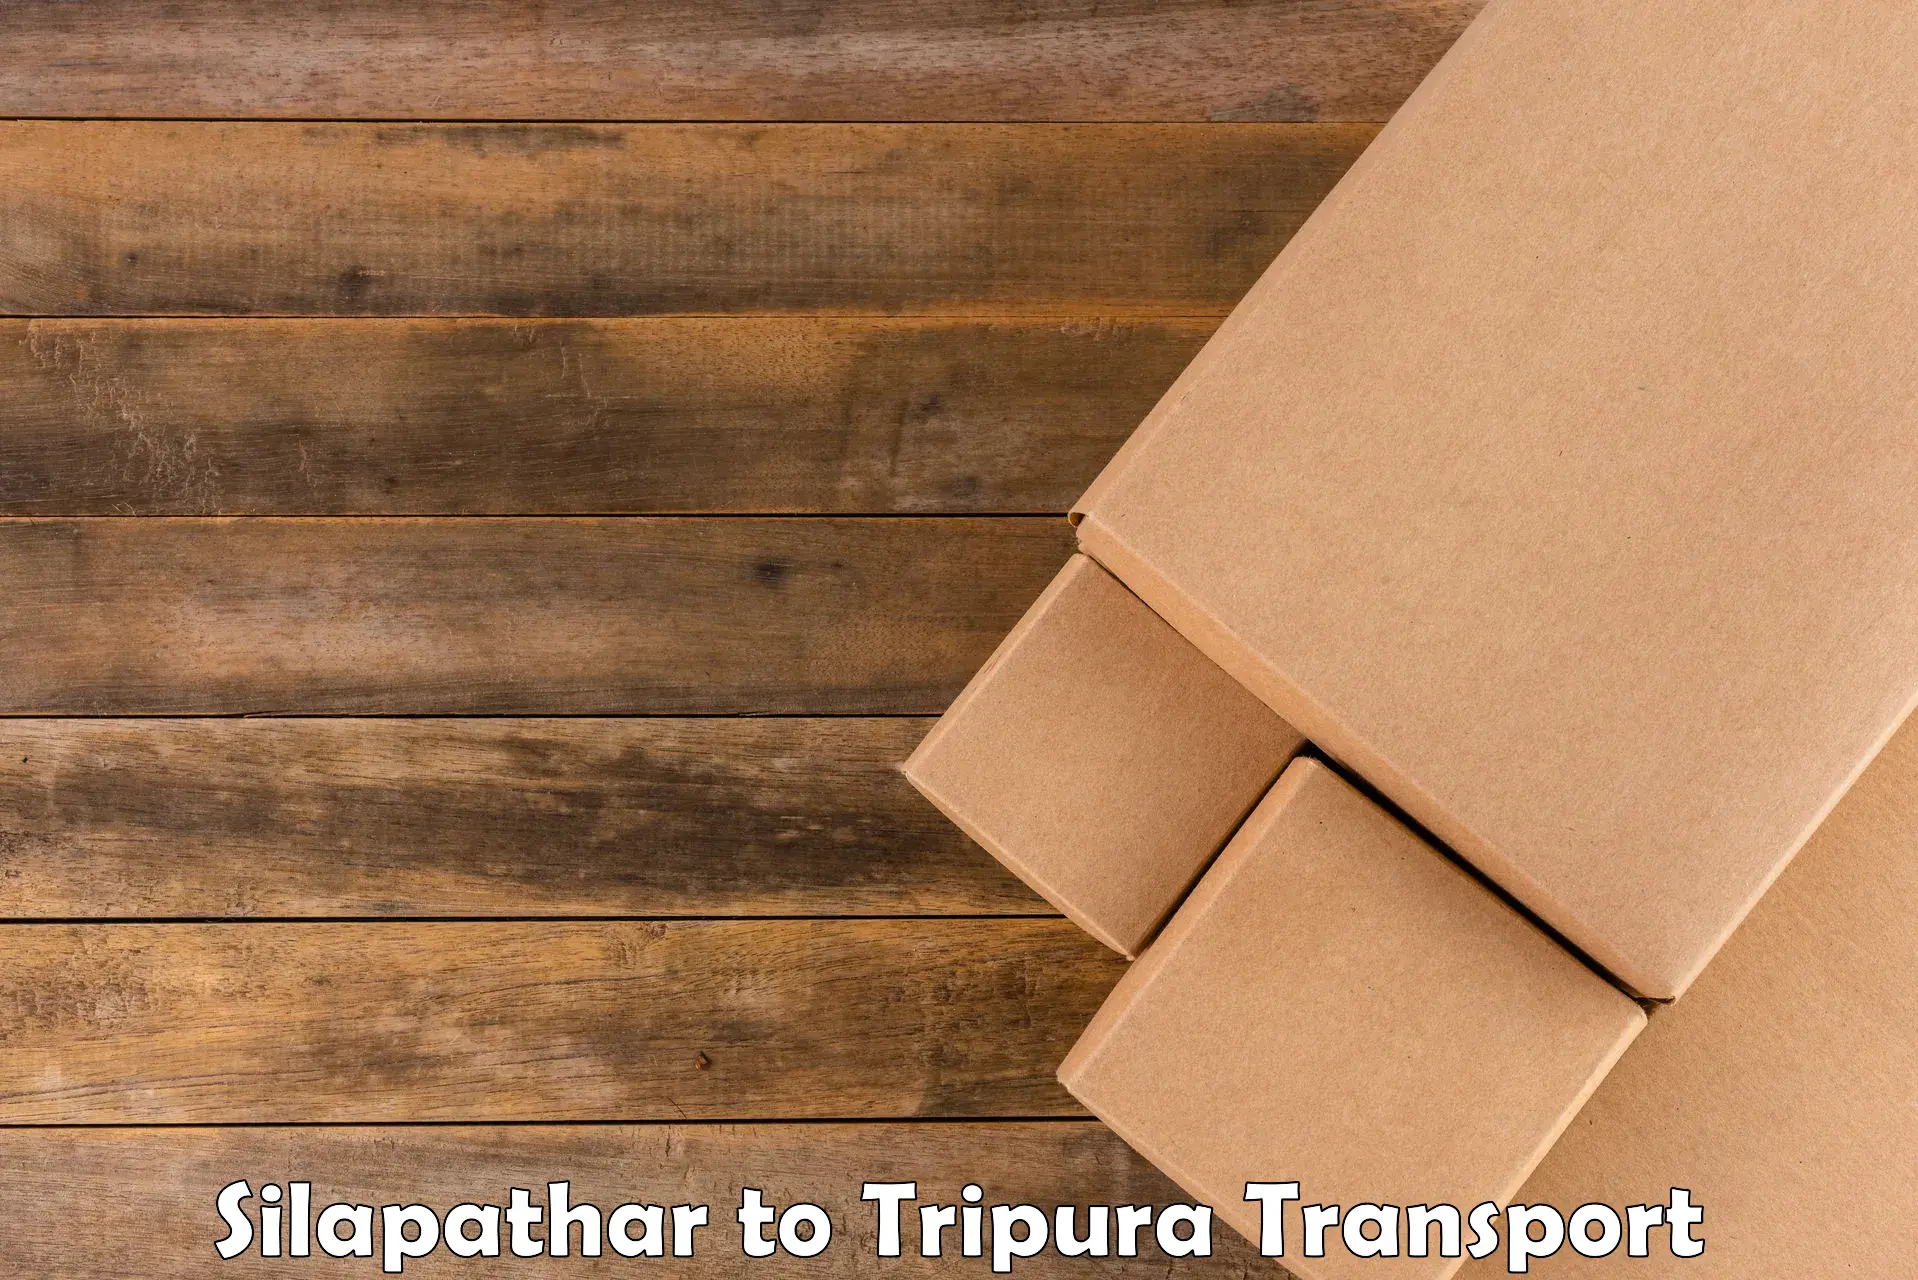 Cargo train transport services Silapathar to Tripura